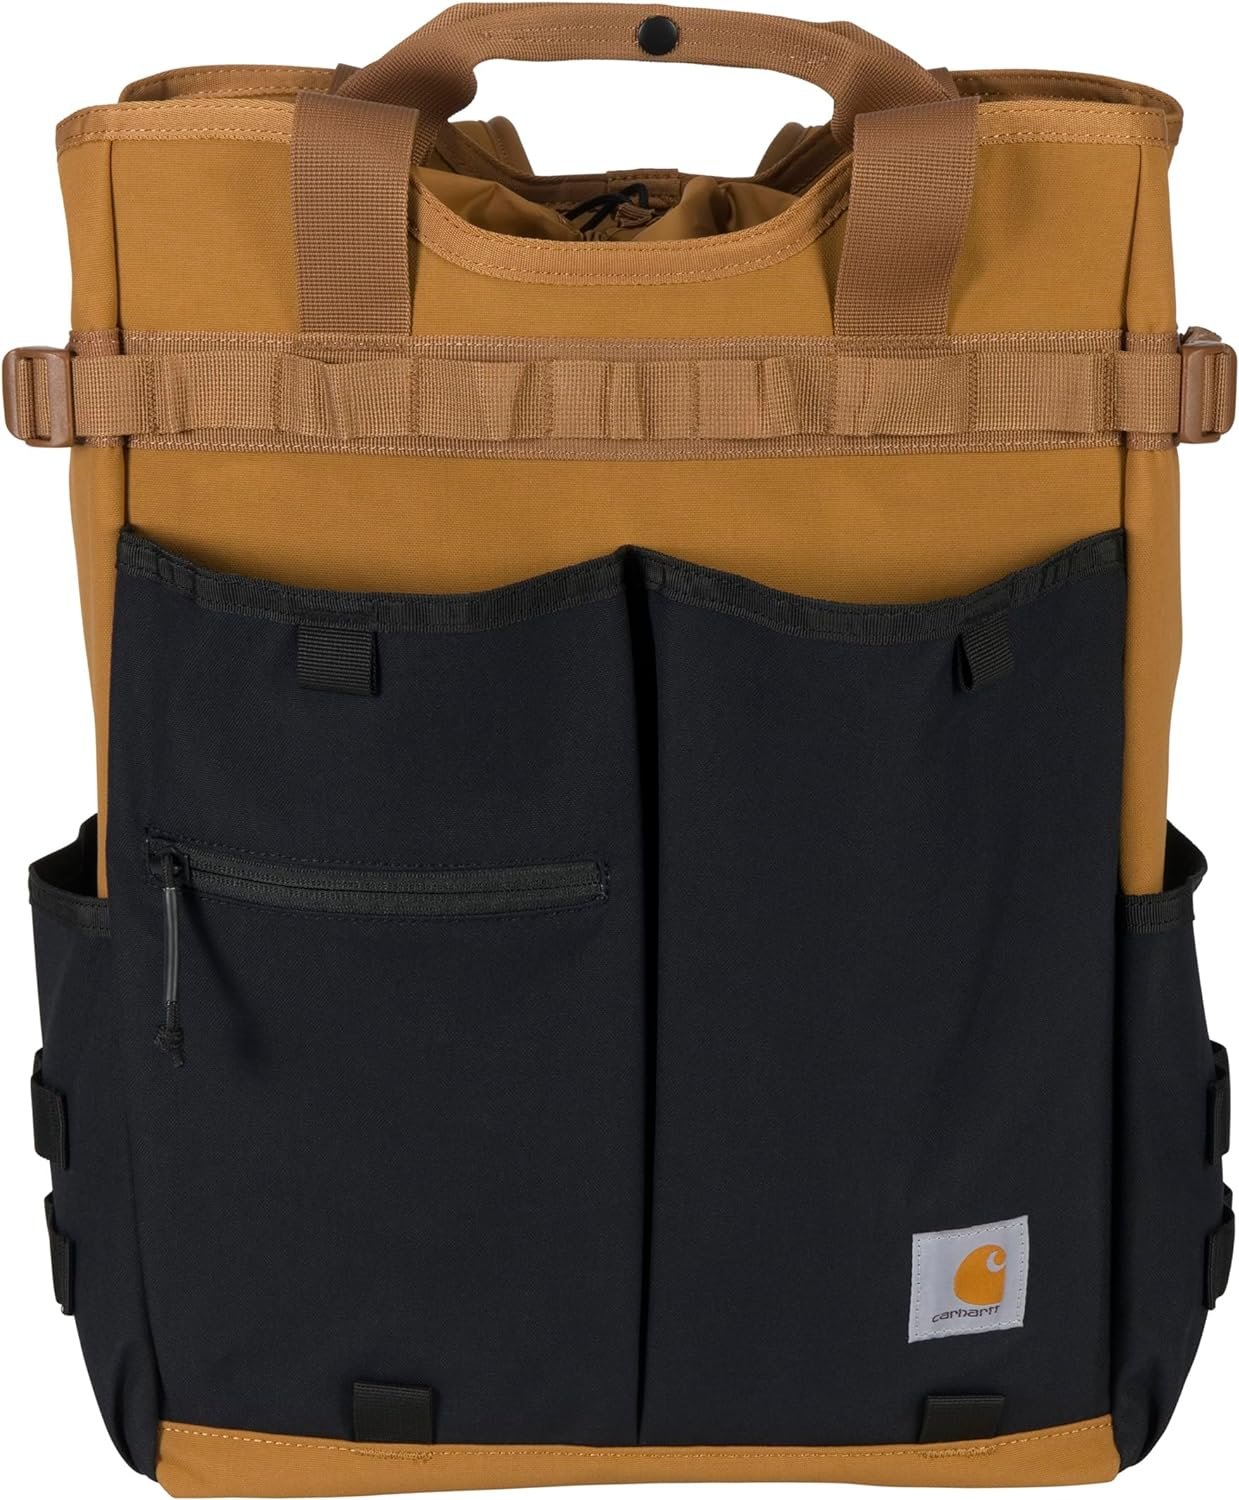 Carhartt 28L Nylon Cinch-Top Convertible Tote, Durable Adjustable Backpack Straps and Laptop Sleeve, Brown